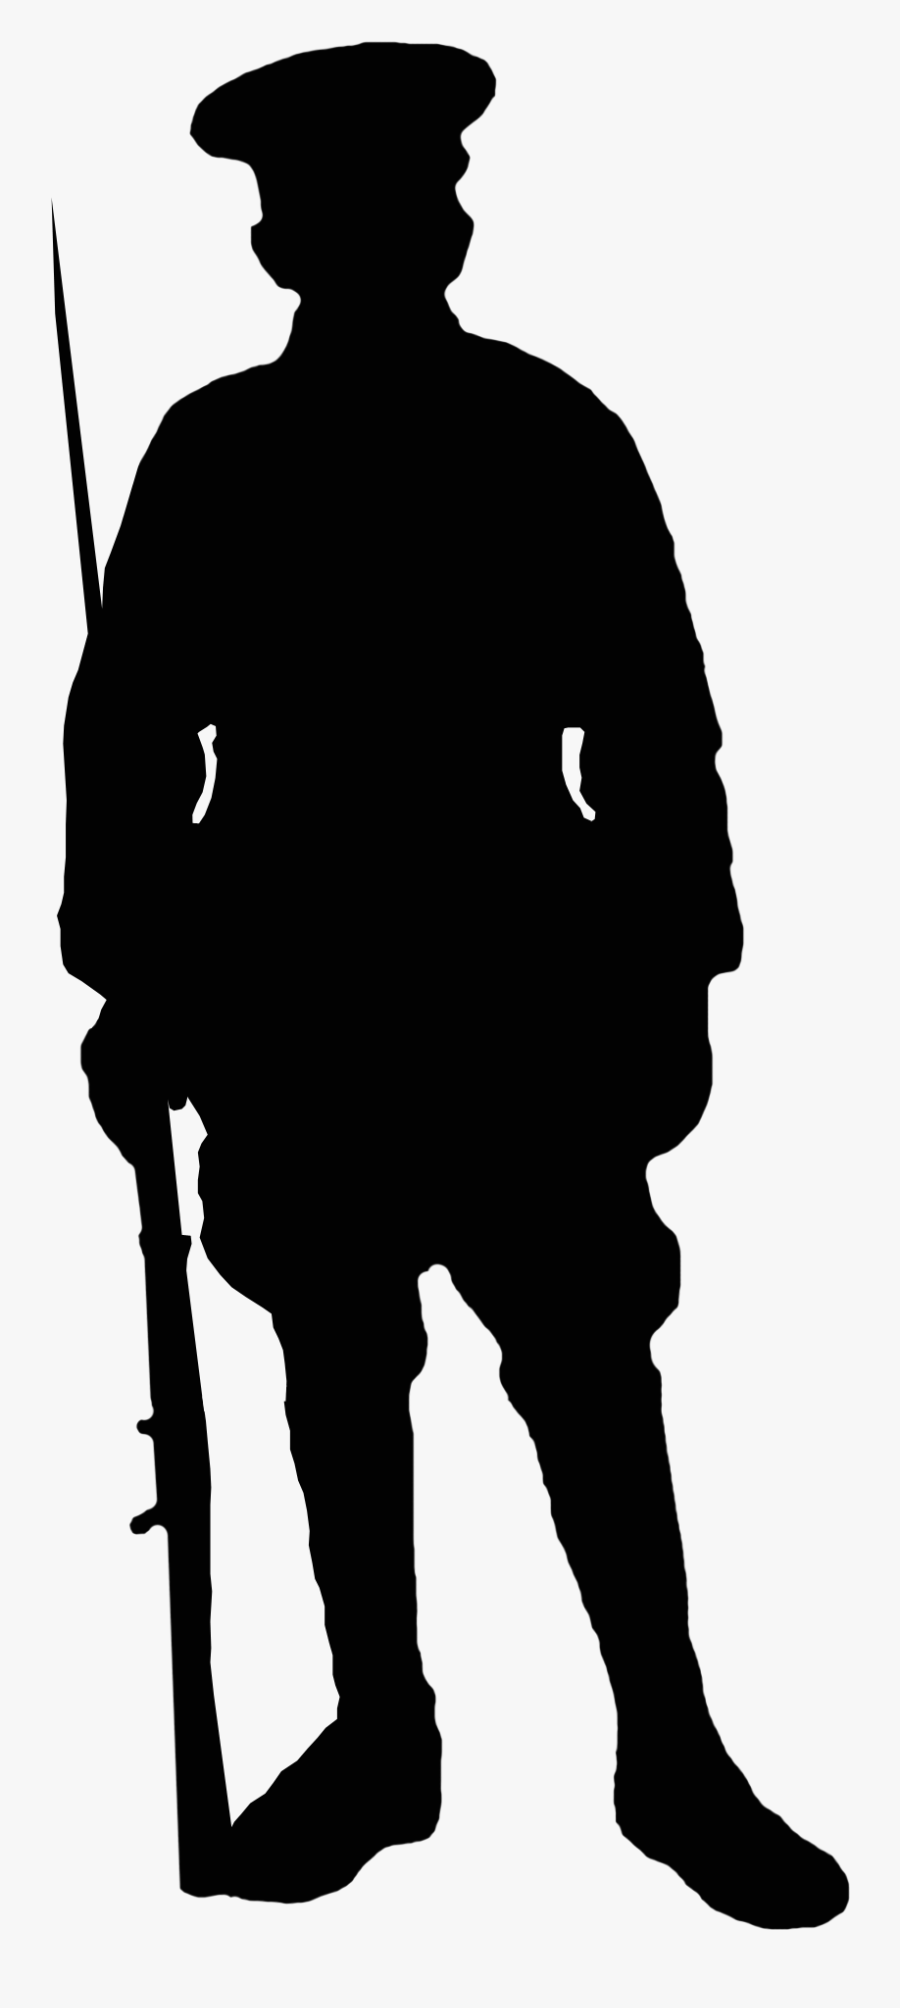 First World War Soldier Army Military Silhouette - World War 1 Soldier Silhouette, Transparent Clipart